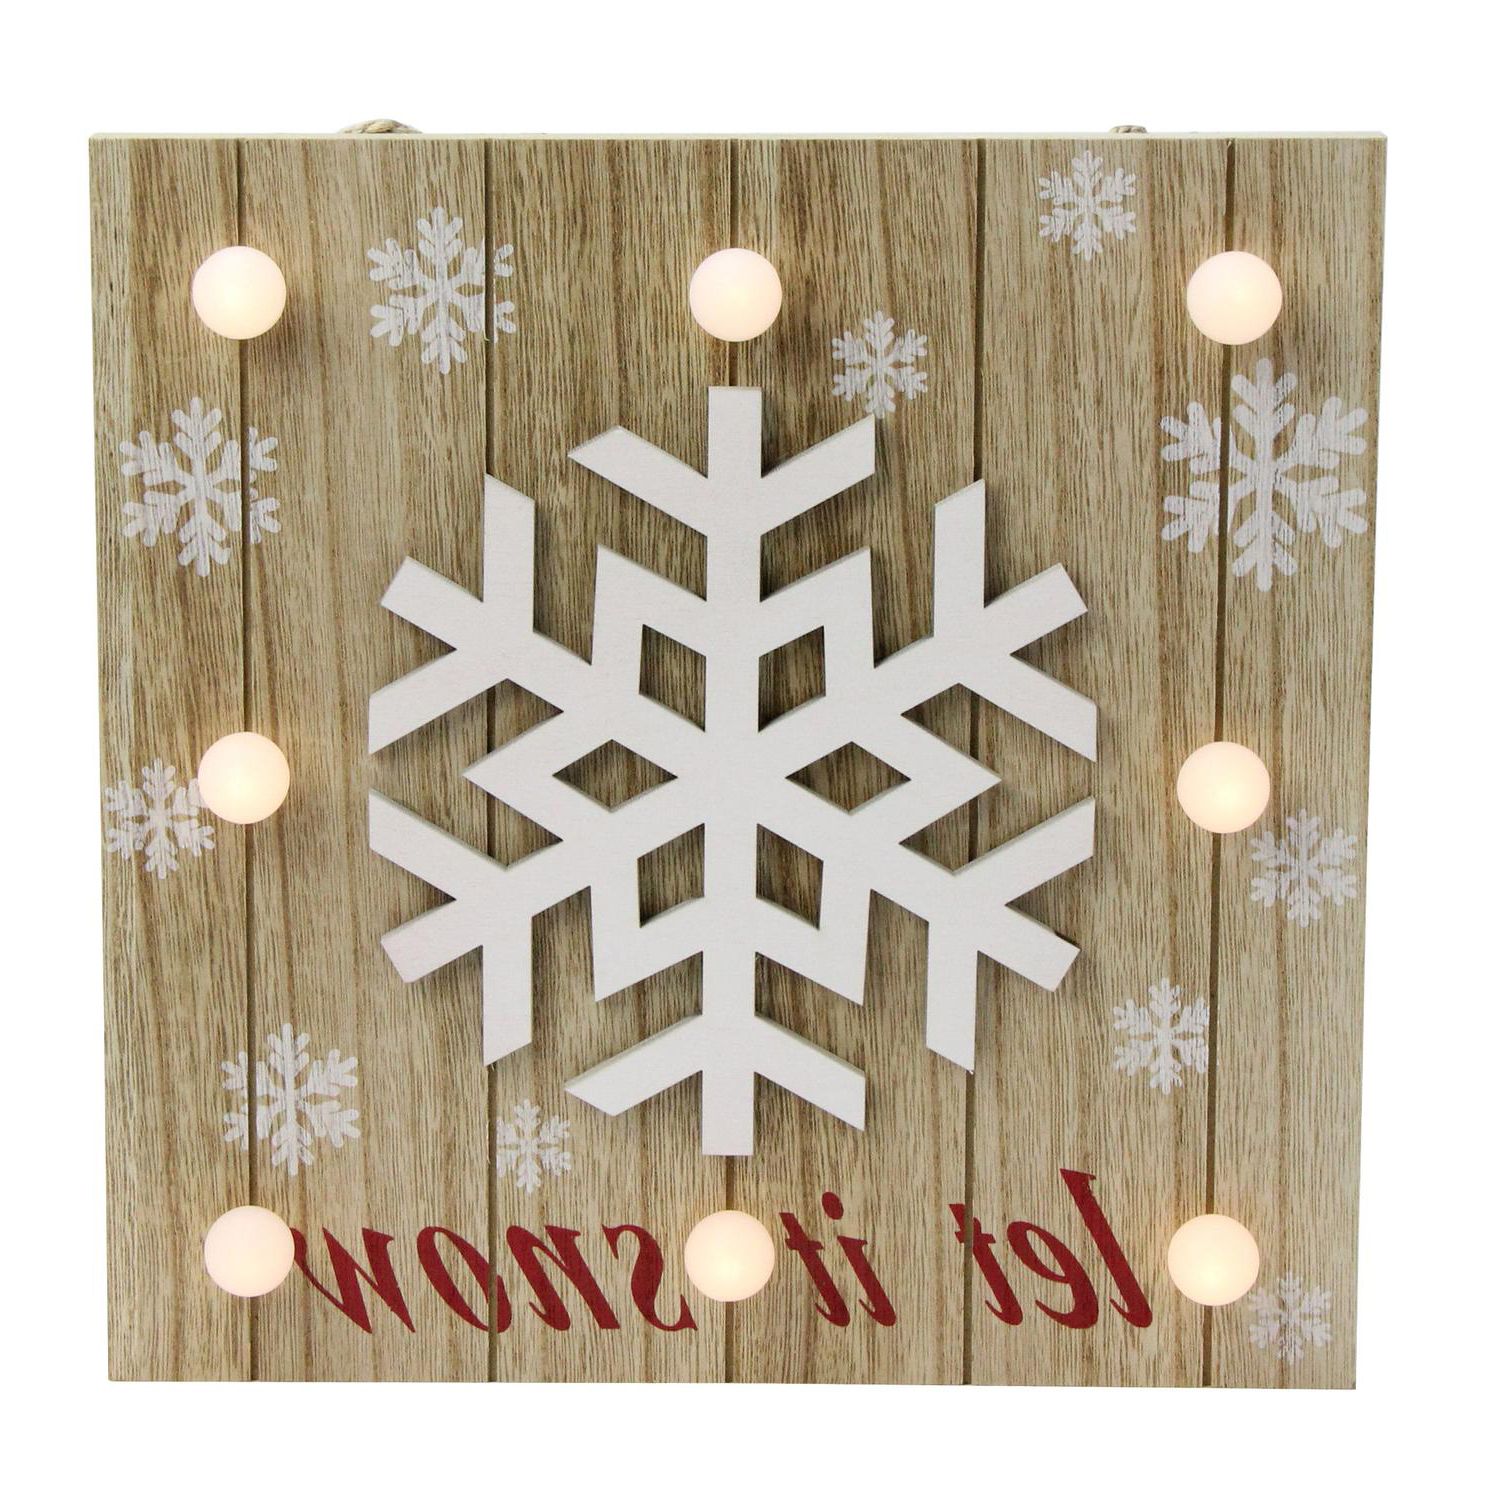 Let It Snow Natural Wood & Snowflake Wall Decor – Pier1 For Most Recently Released Snow Wall Art (View 13 of 20)